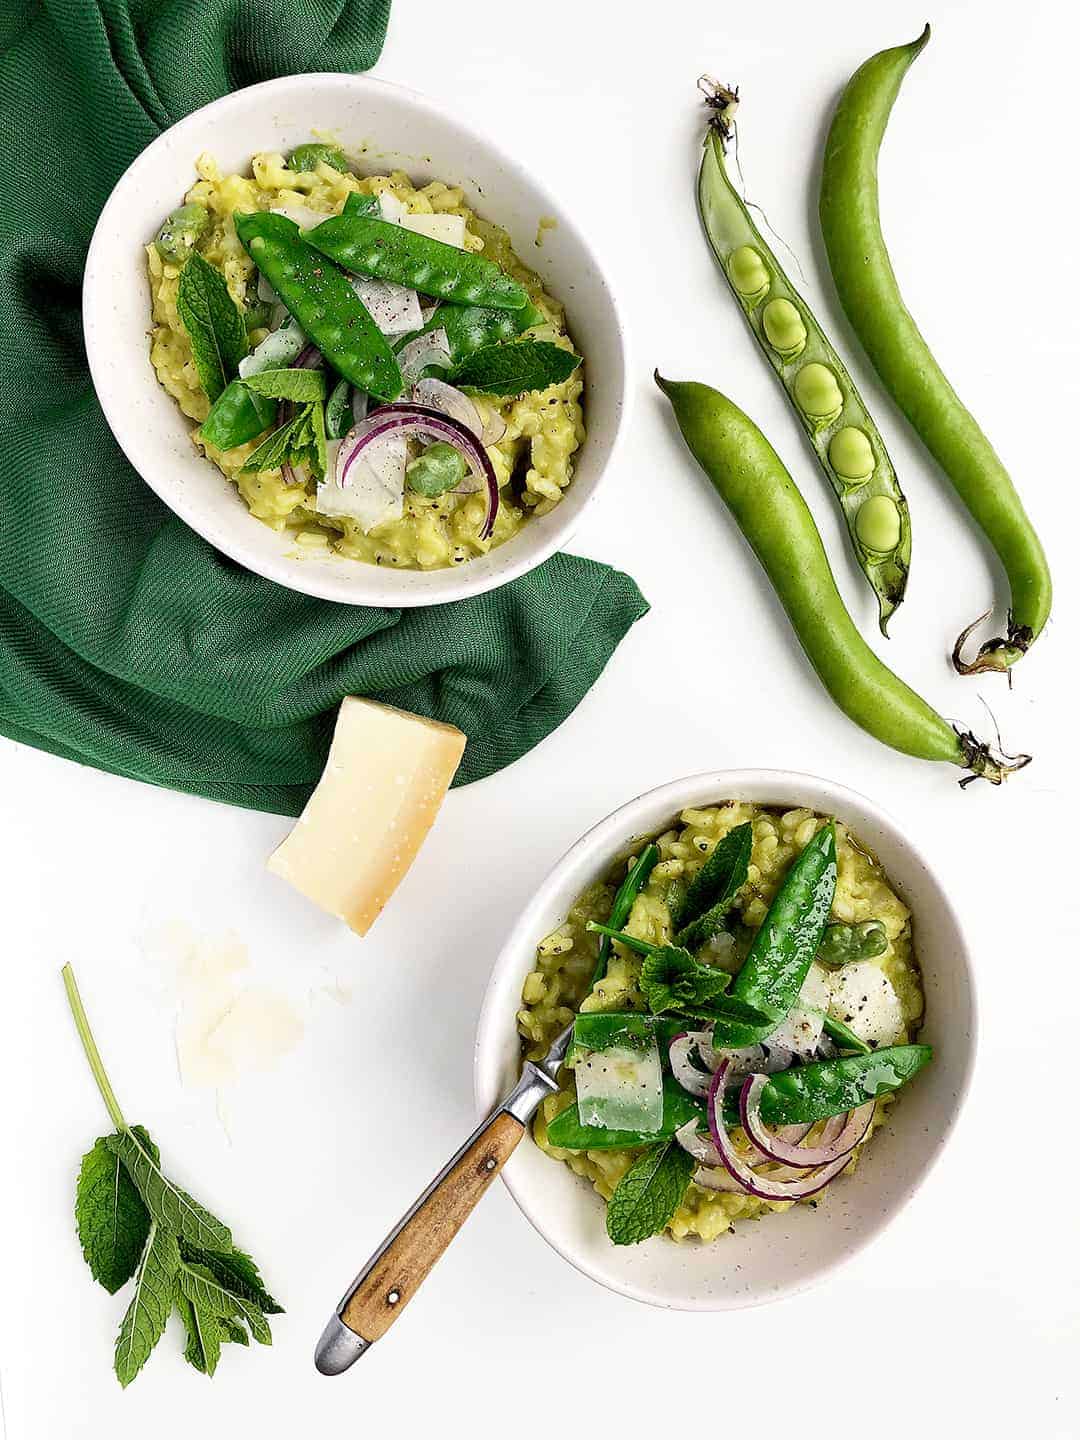 Creamy Vegetarian Snow Pea Risotto with Broad Beans